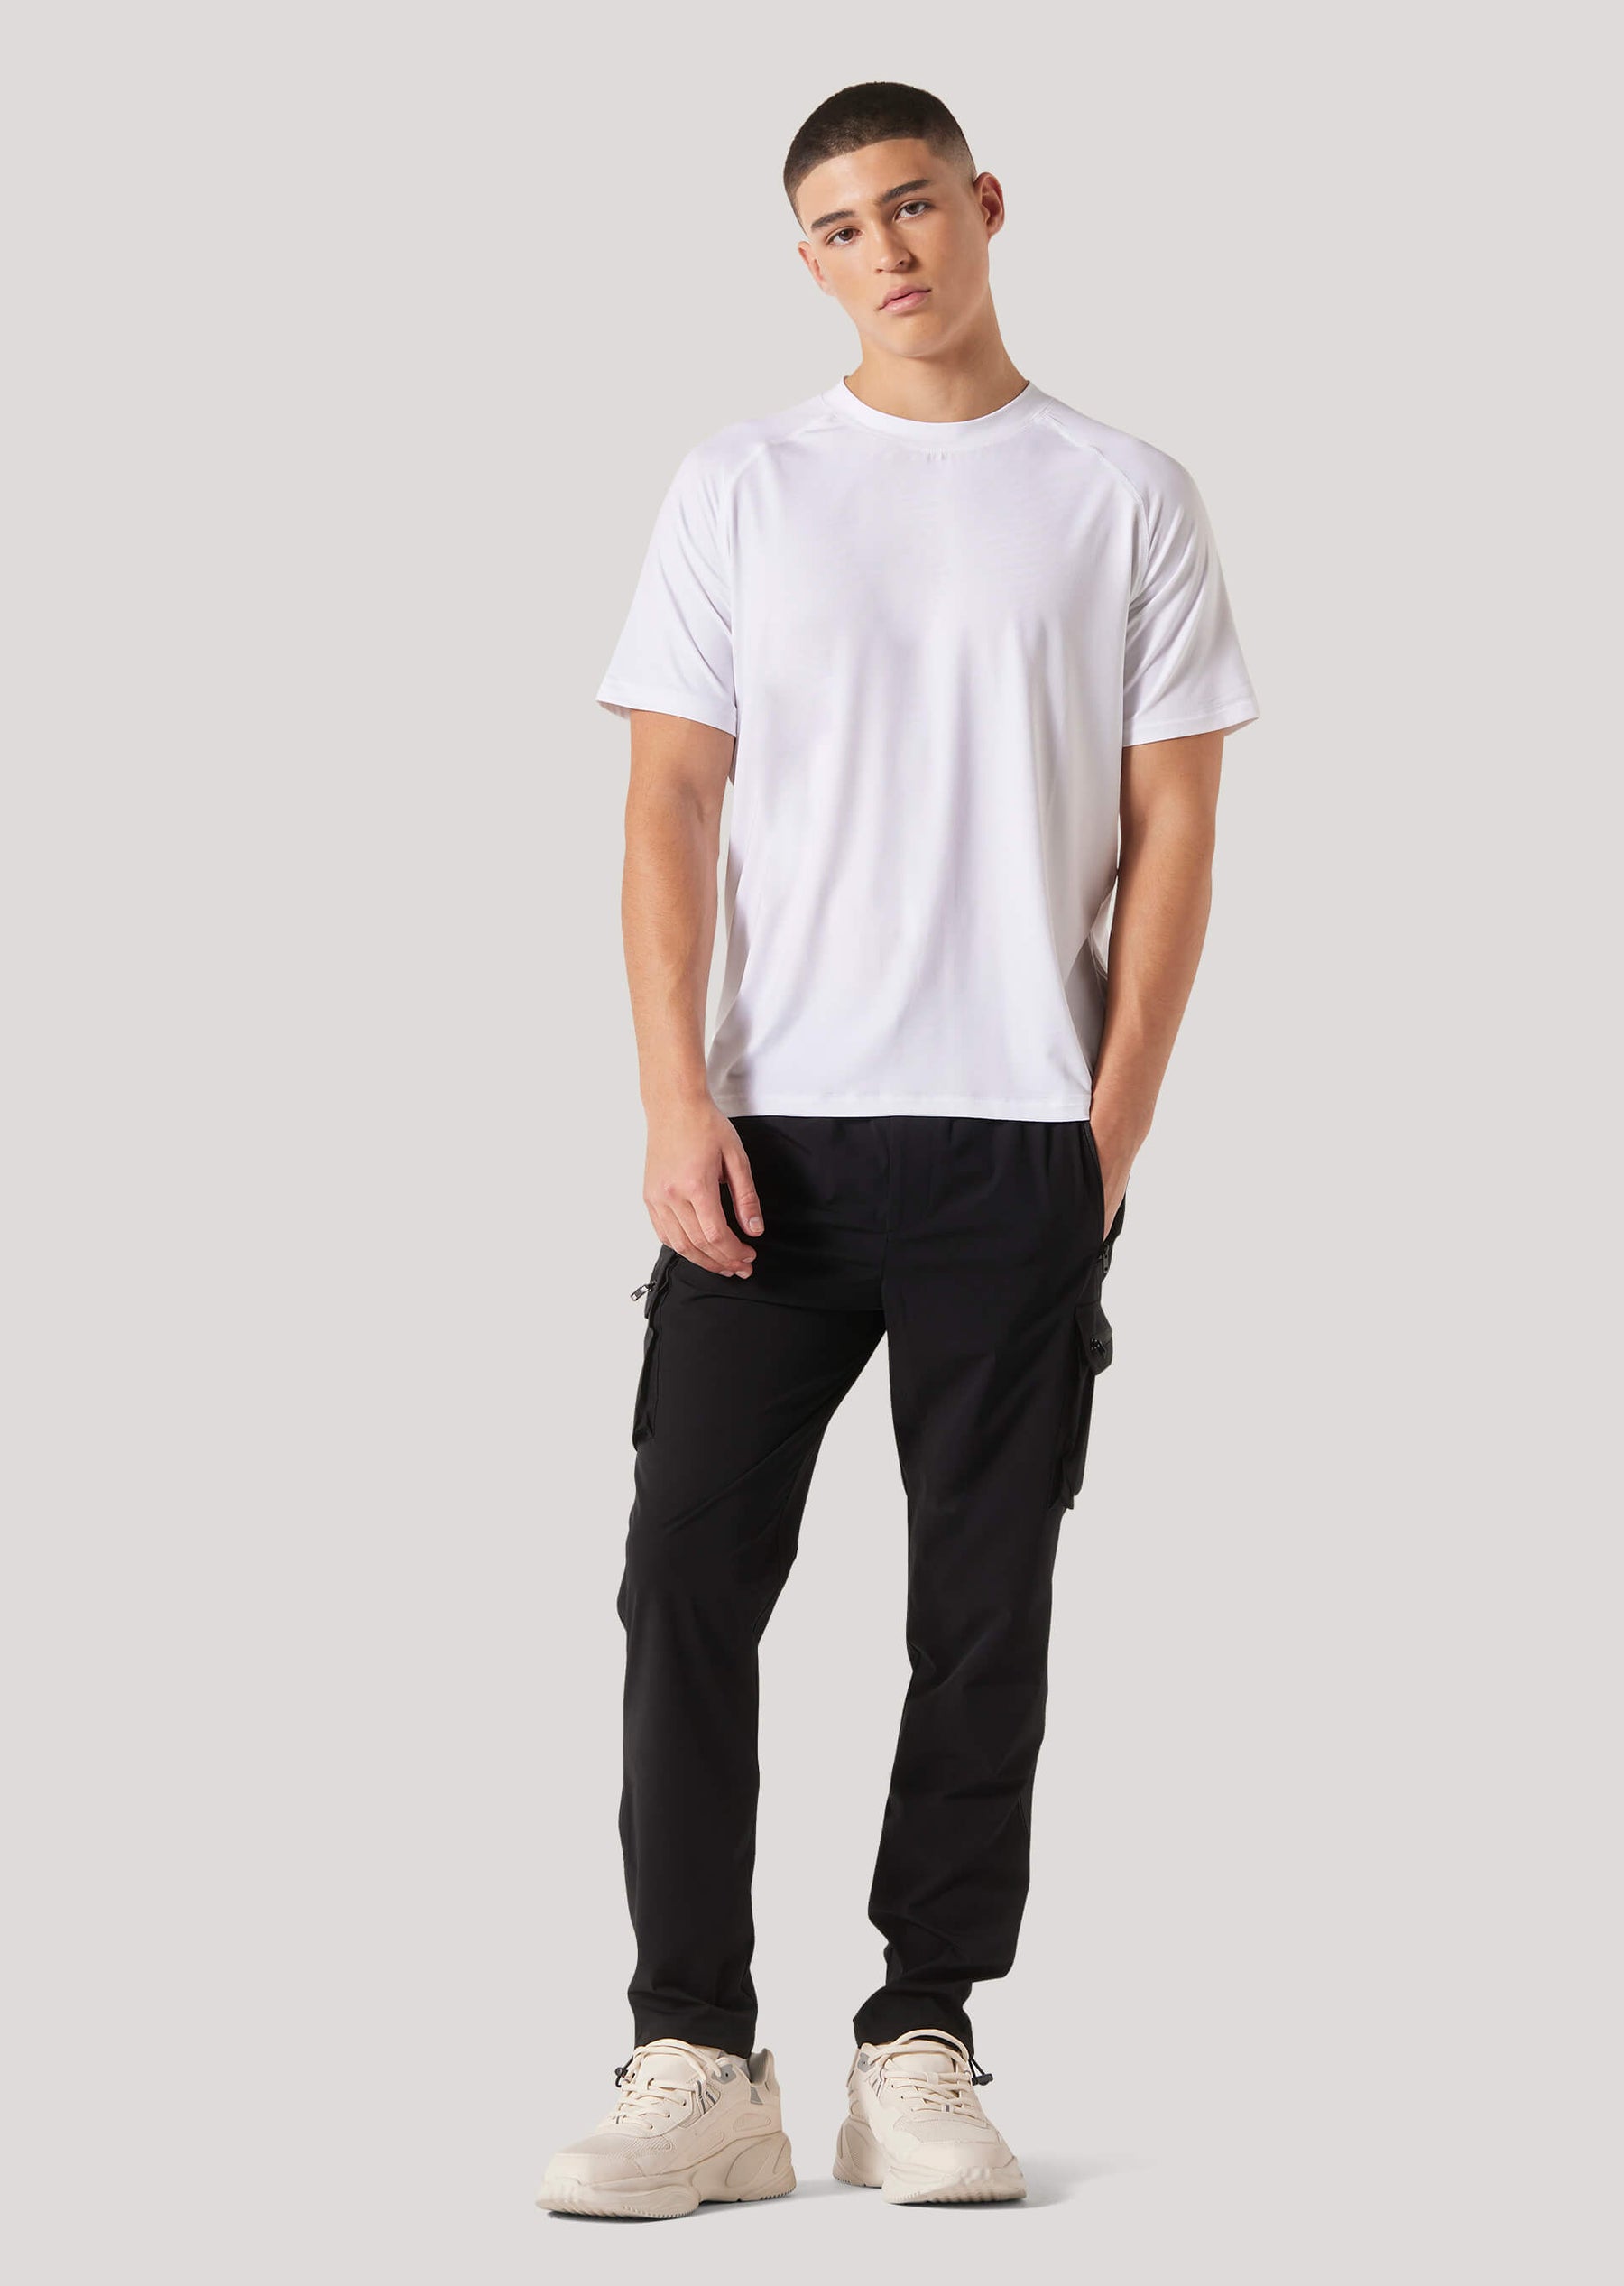 Taggart White Activewear Performance Tee